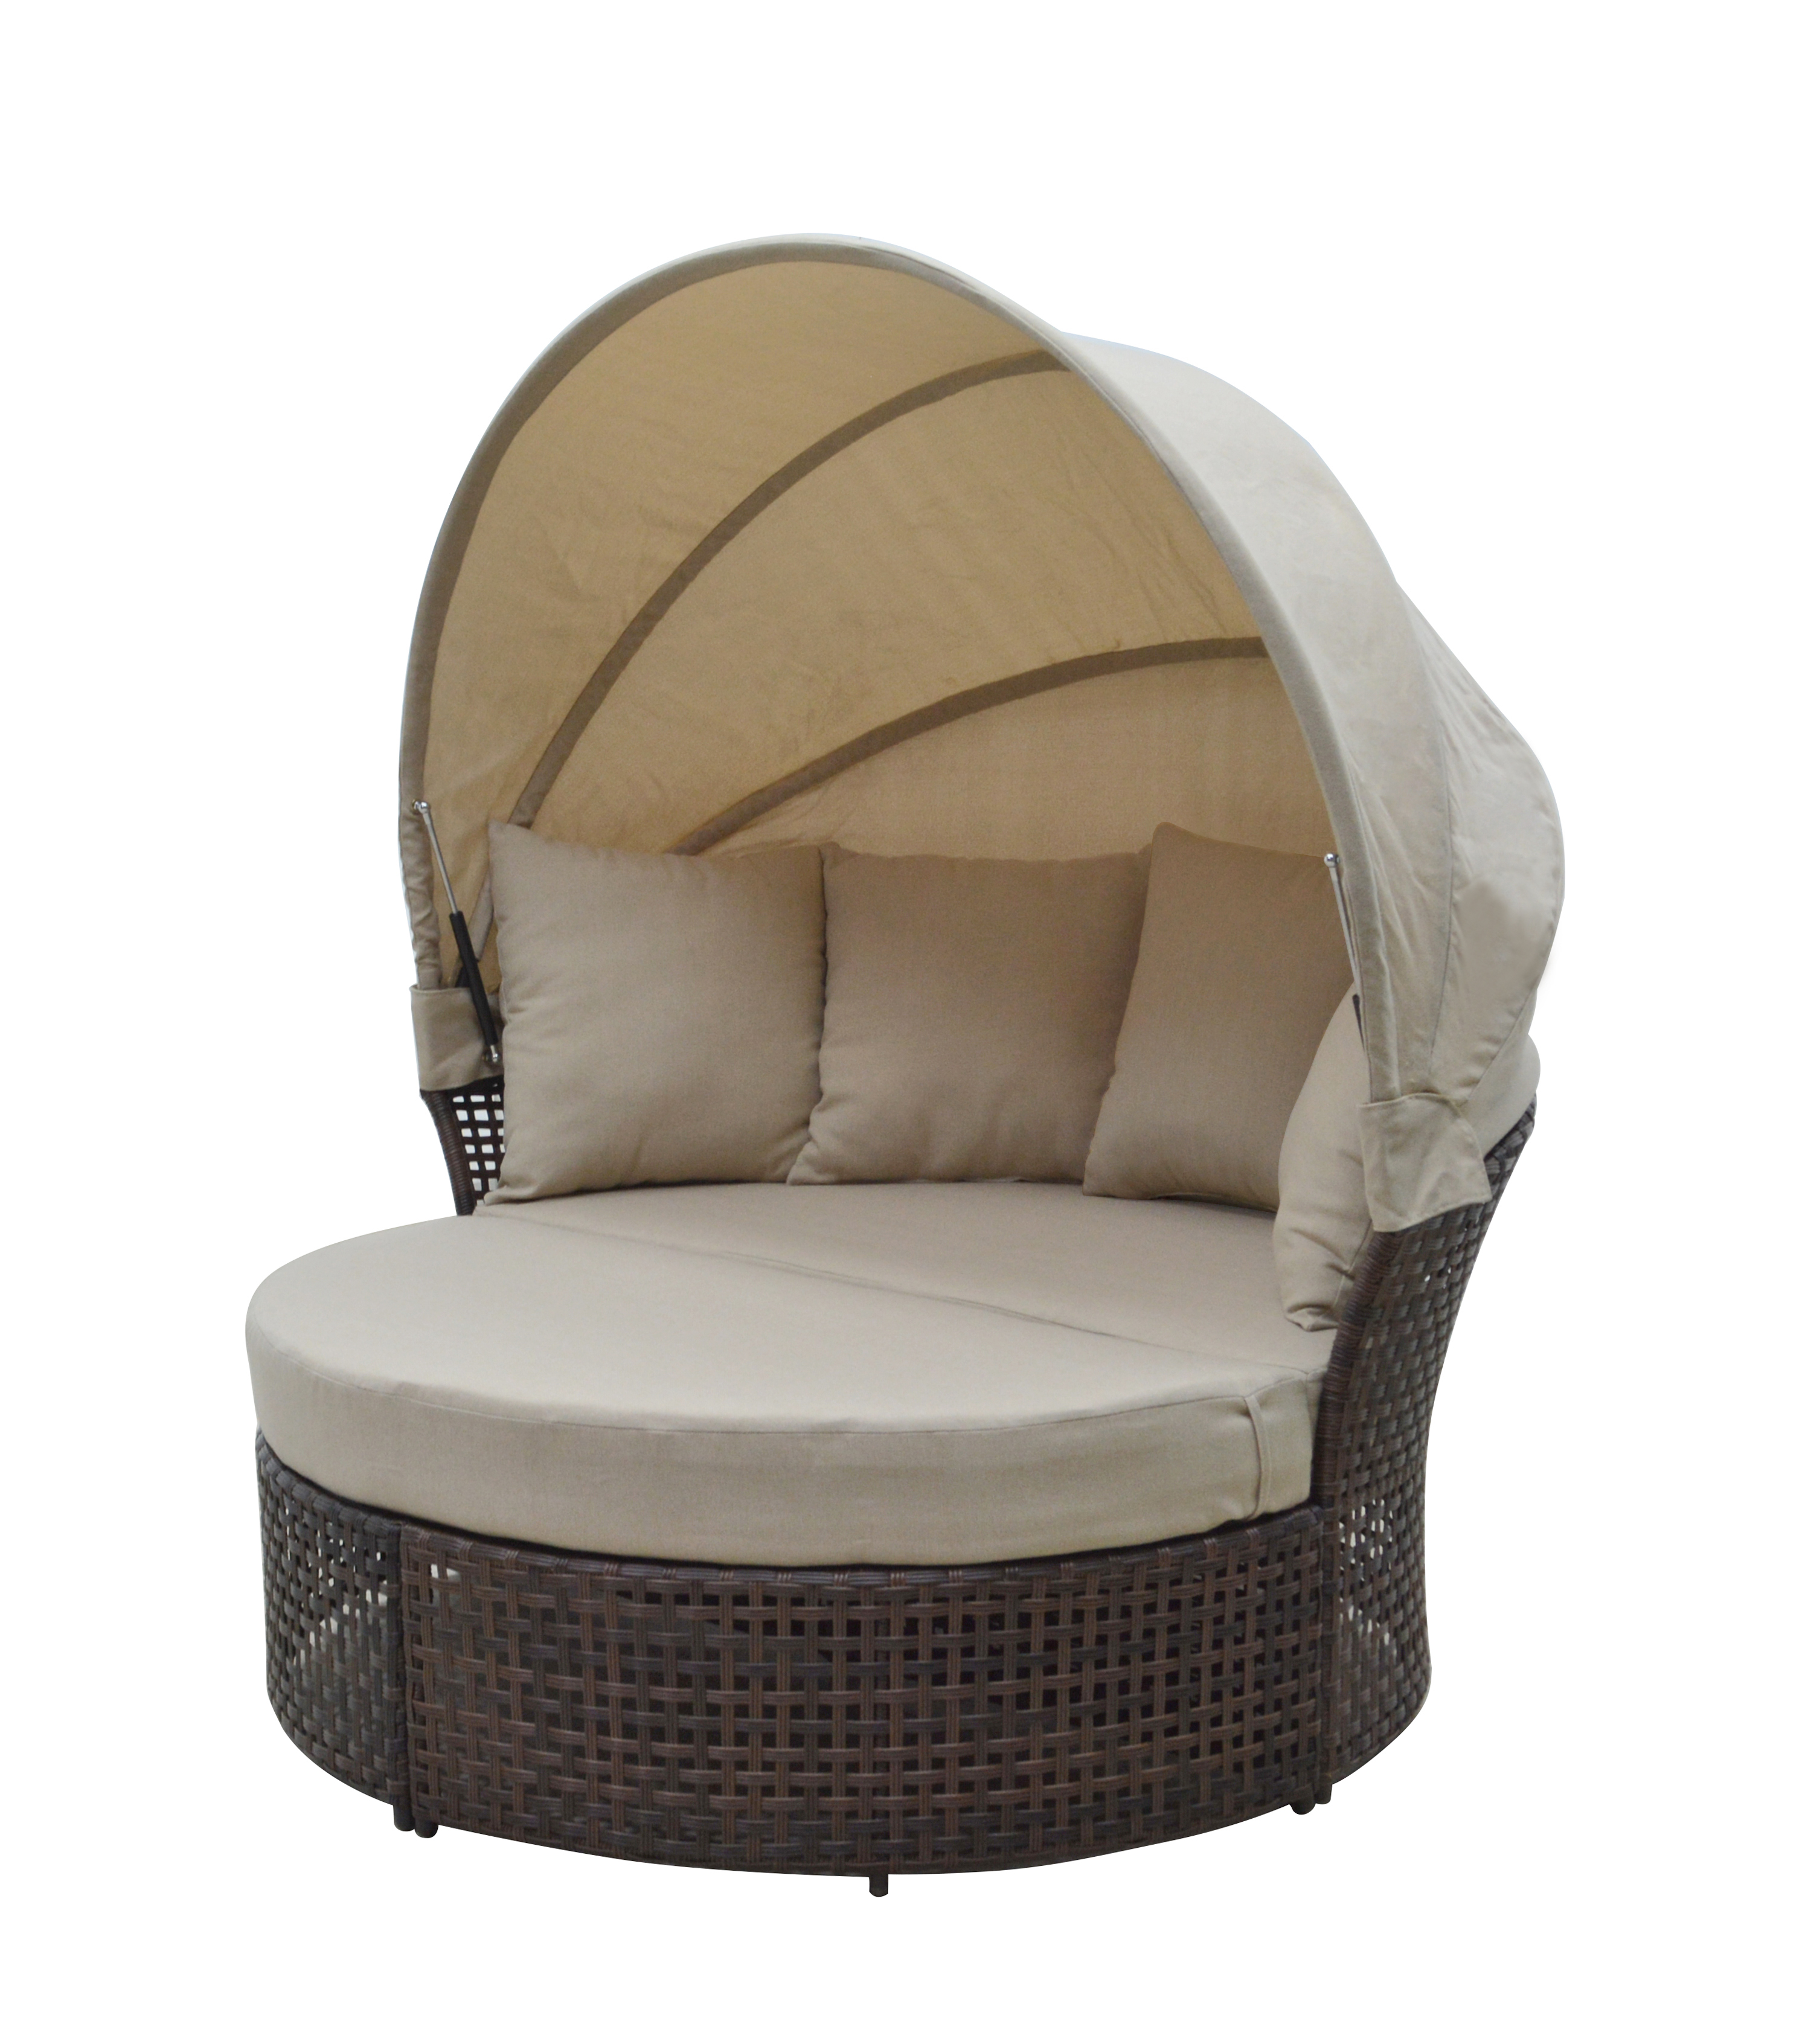 Mainstays Tuscany Ridge 2-Piece Outdoor Daybed with Retractable Canopy, Beige - image 2 of 10